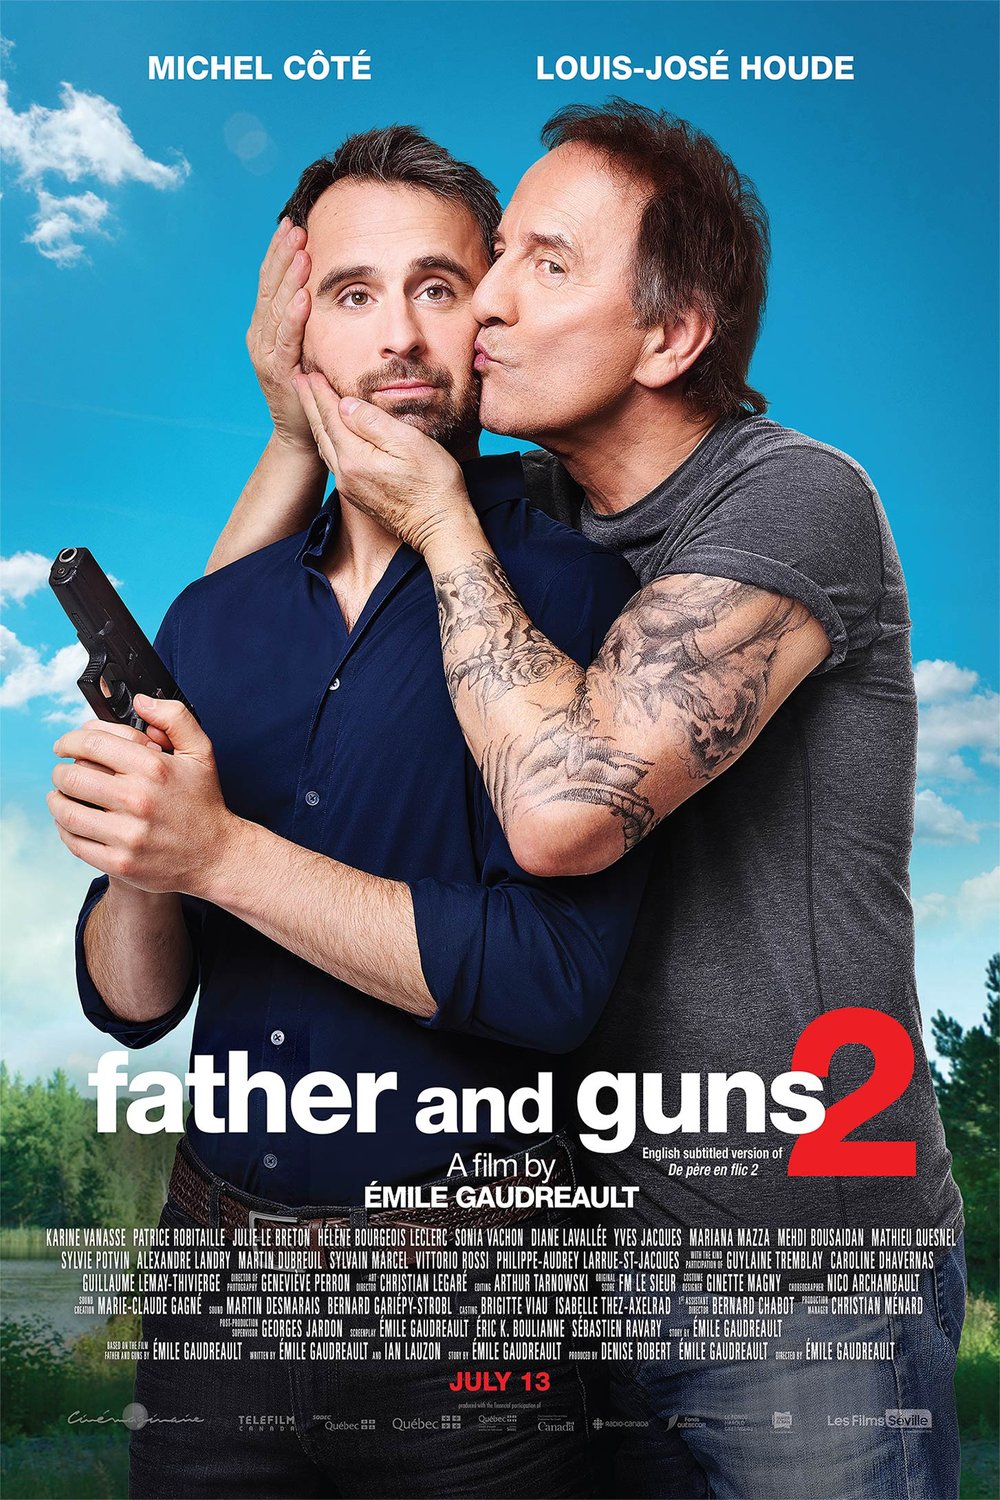 Poster of the movie Father and Guns 2